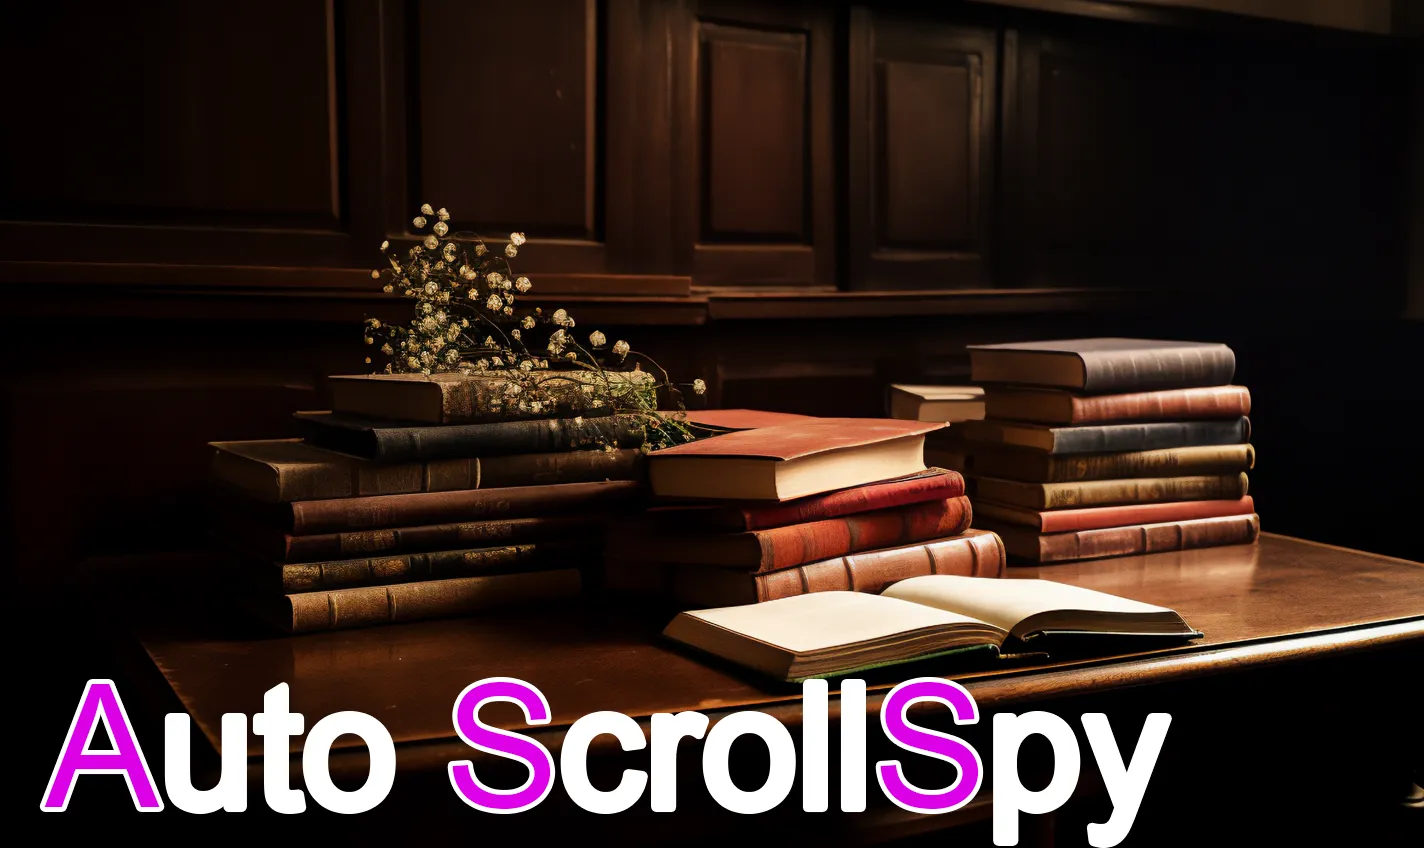 Introductory image for this article titled Auto Scroll Spy (Joomla 4 Extension)